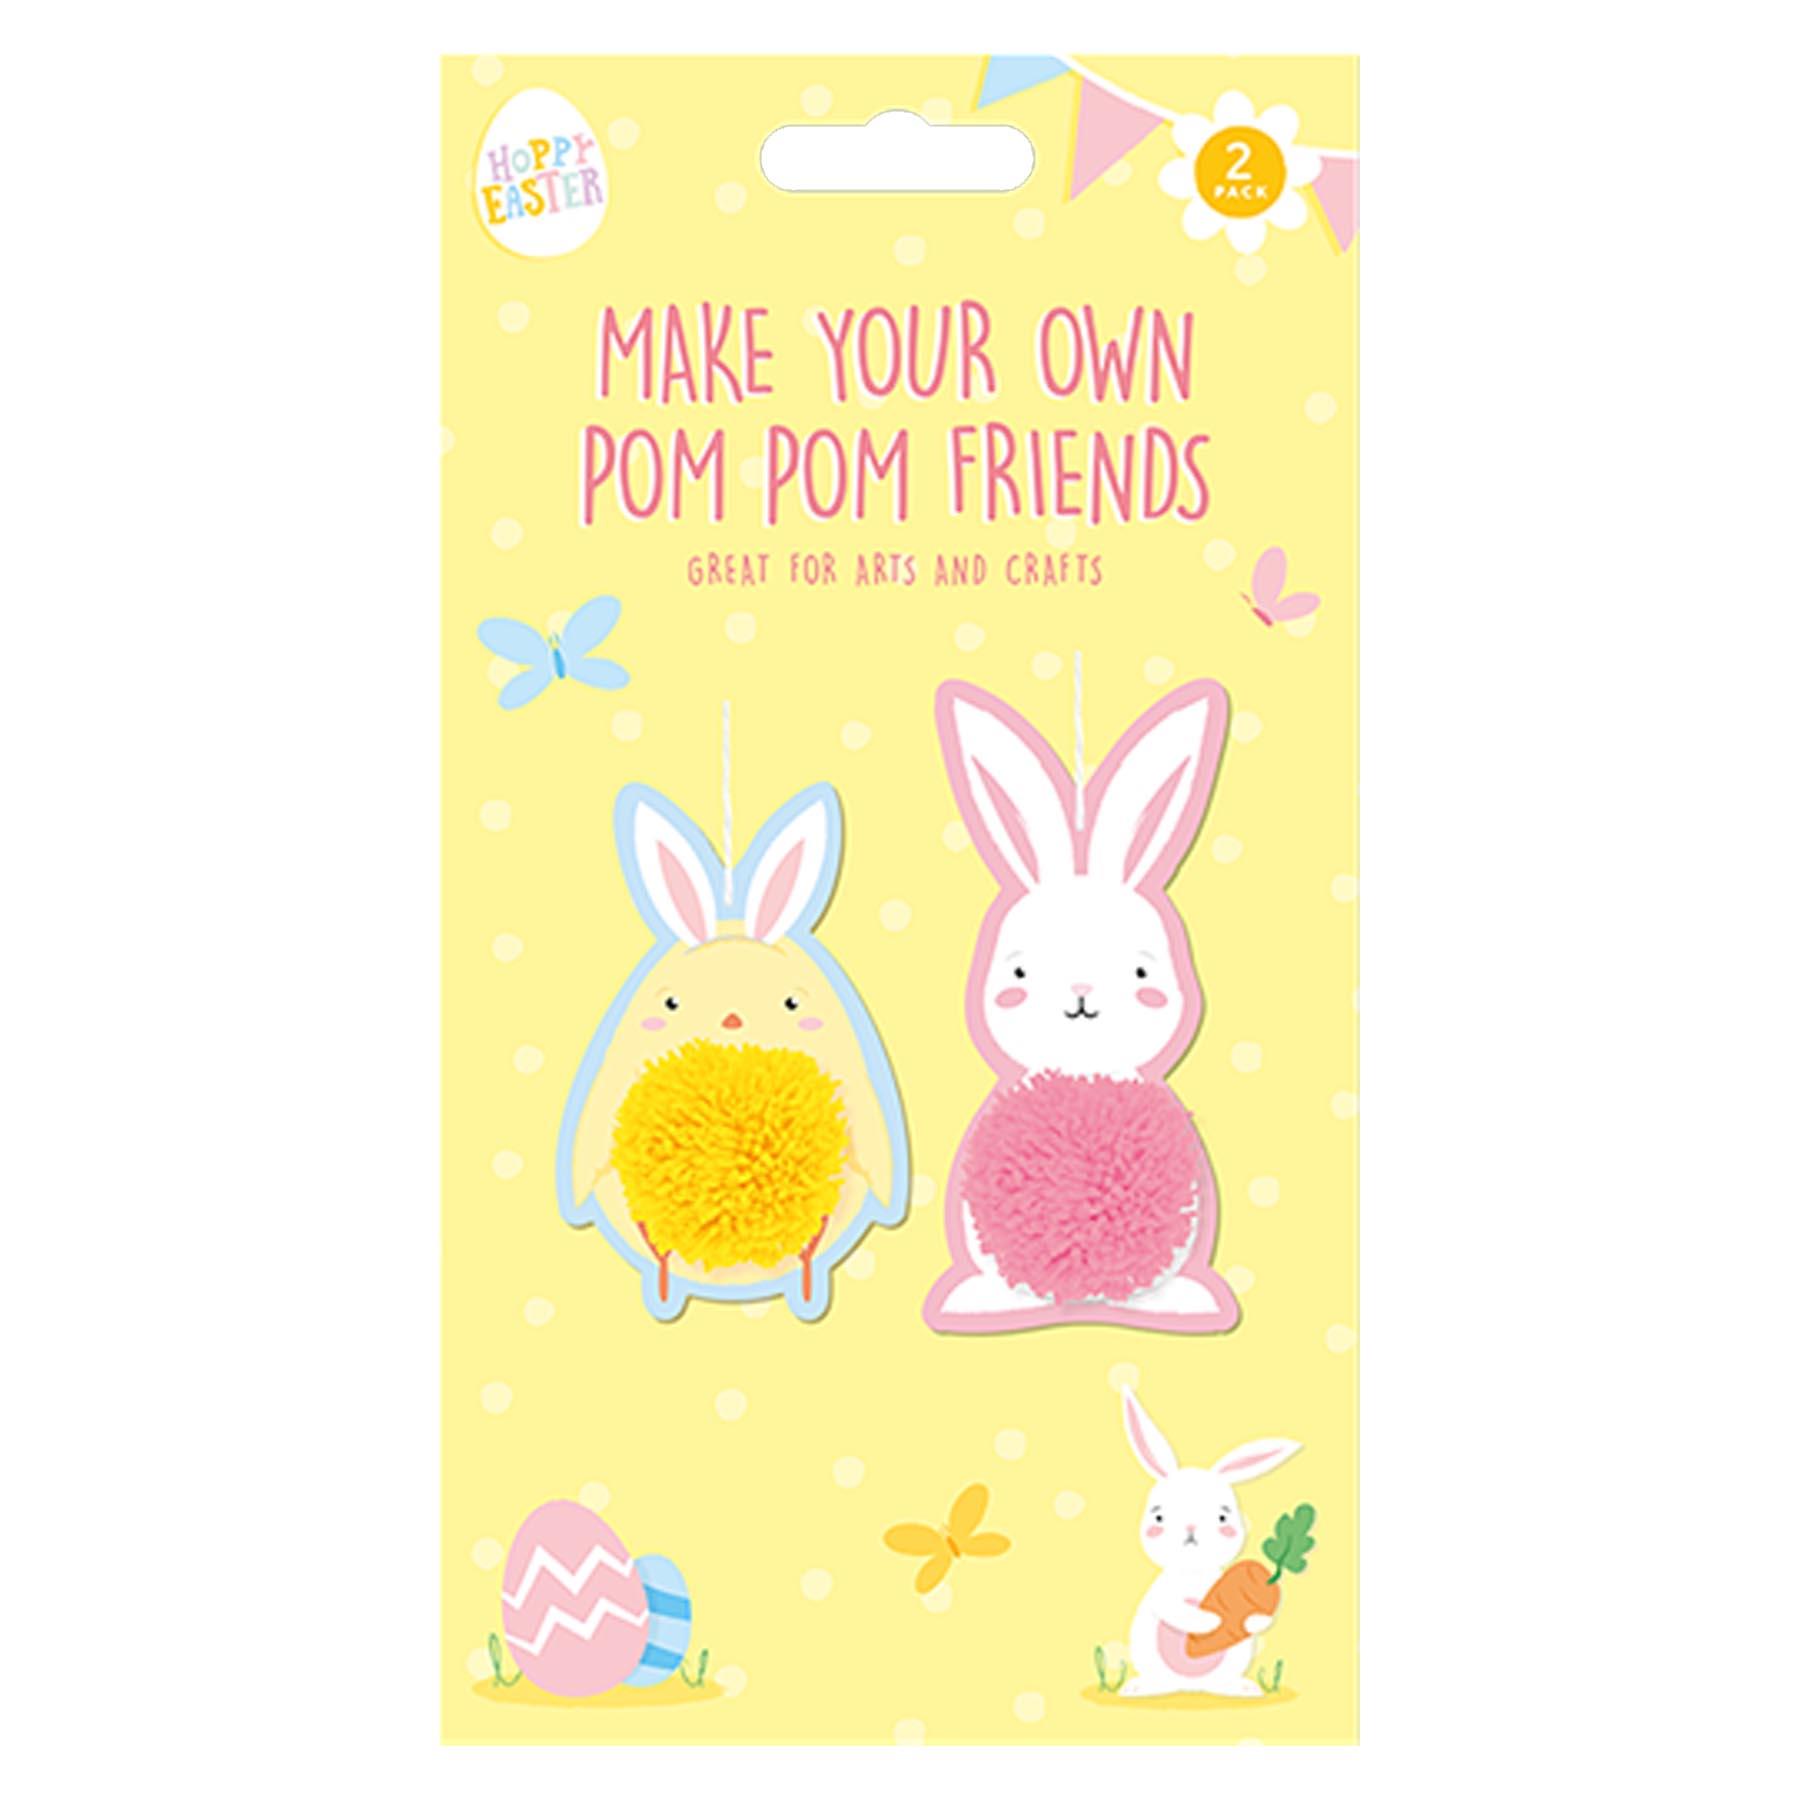 Easter Decorations, Bonnet Making, Arts and Crafts - Make Your Own Pom Pom Friends